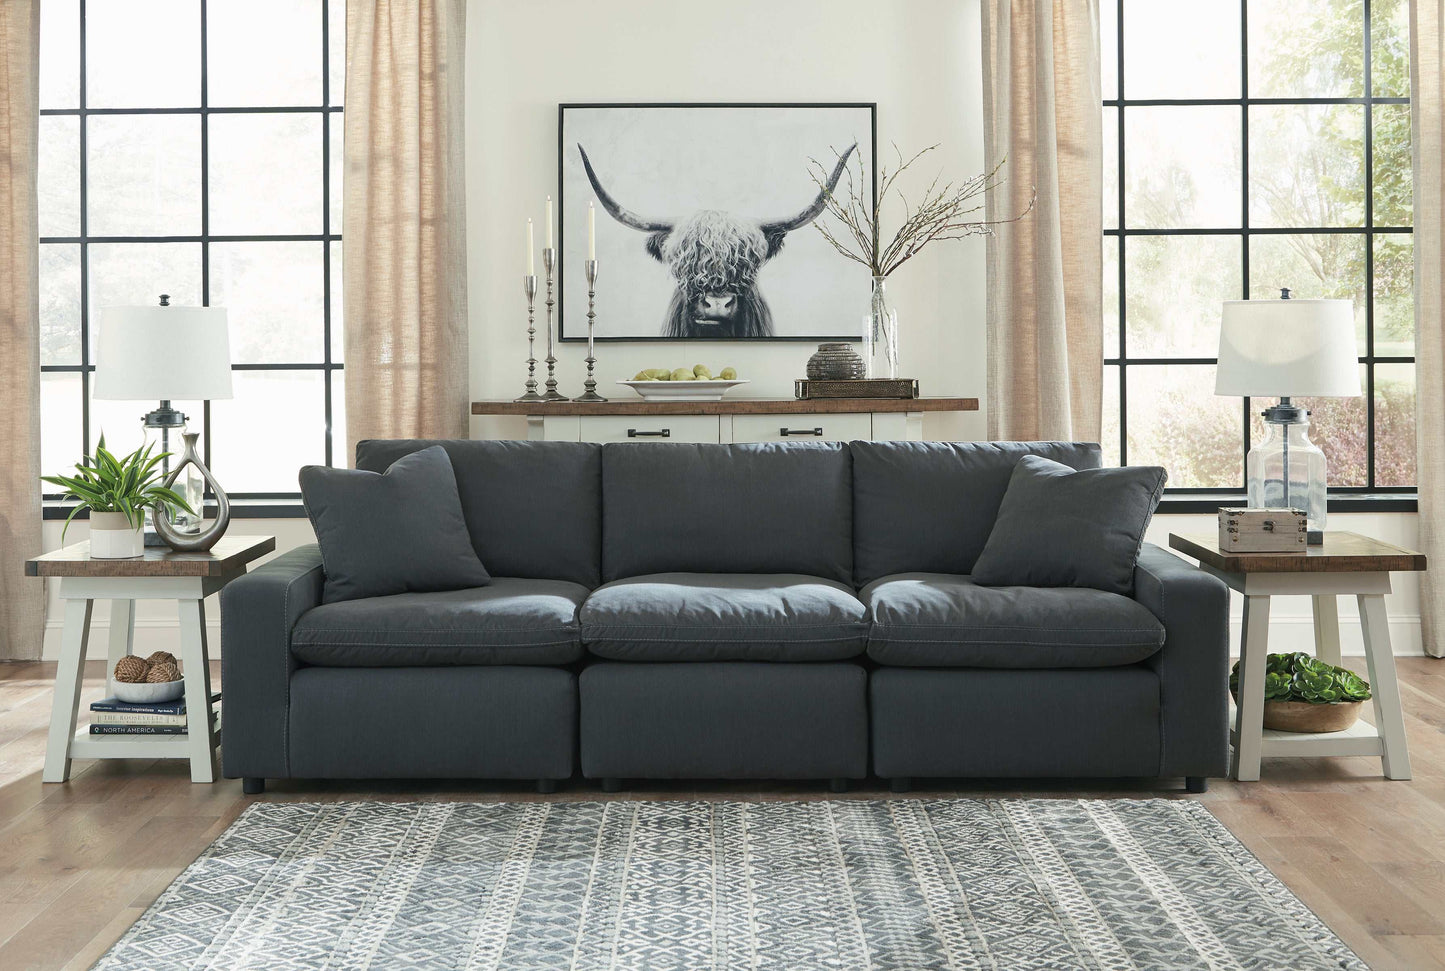 Savesto Charcoal Fabric Modular Sectional Units Create your own Style